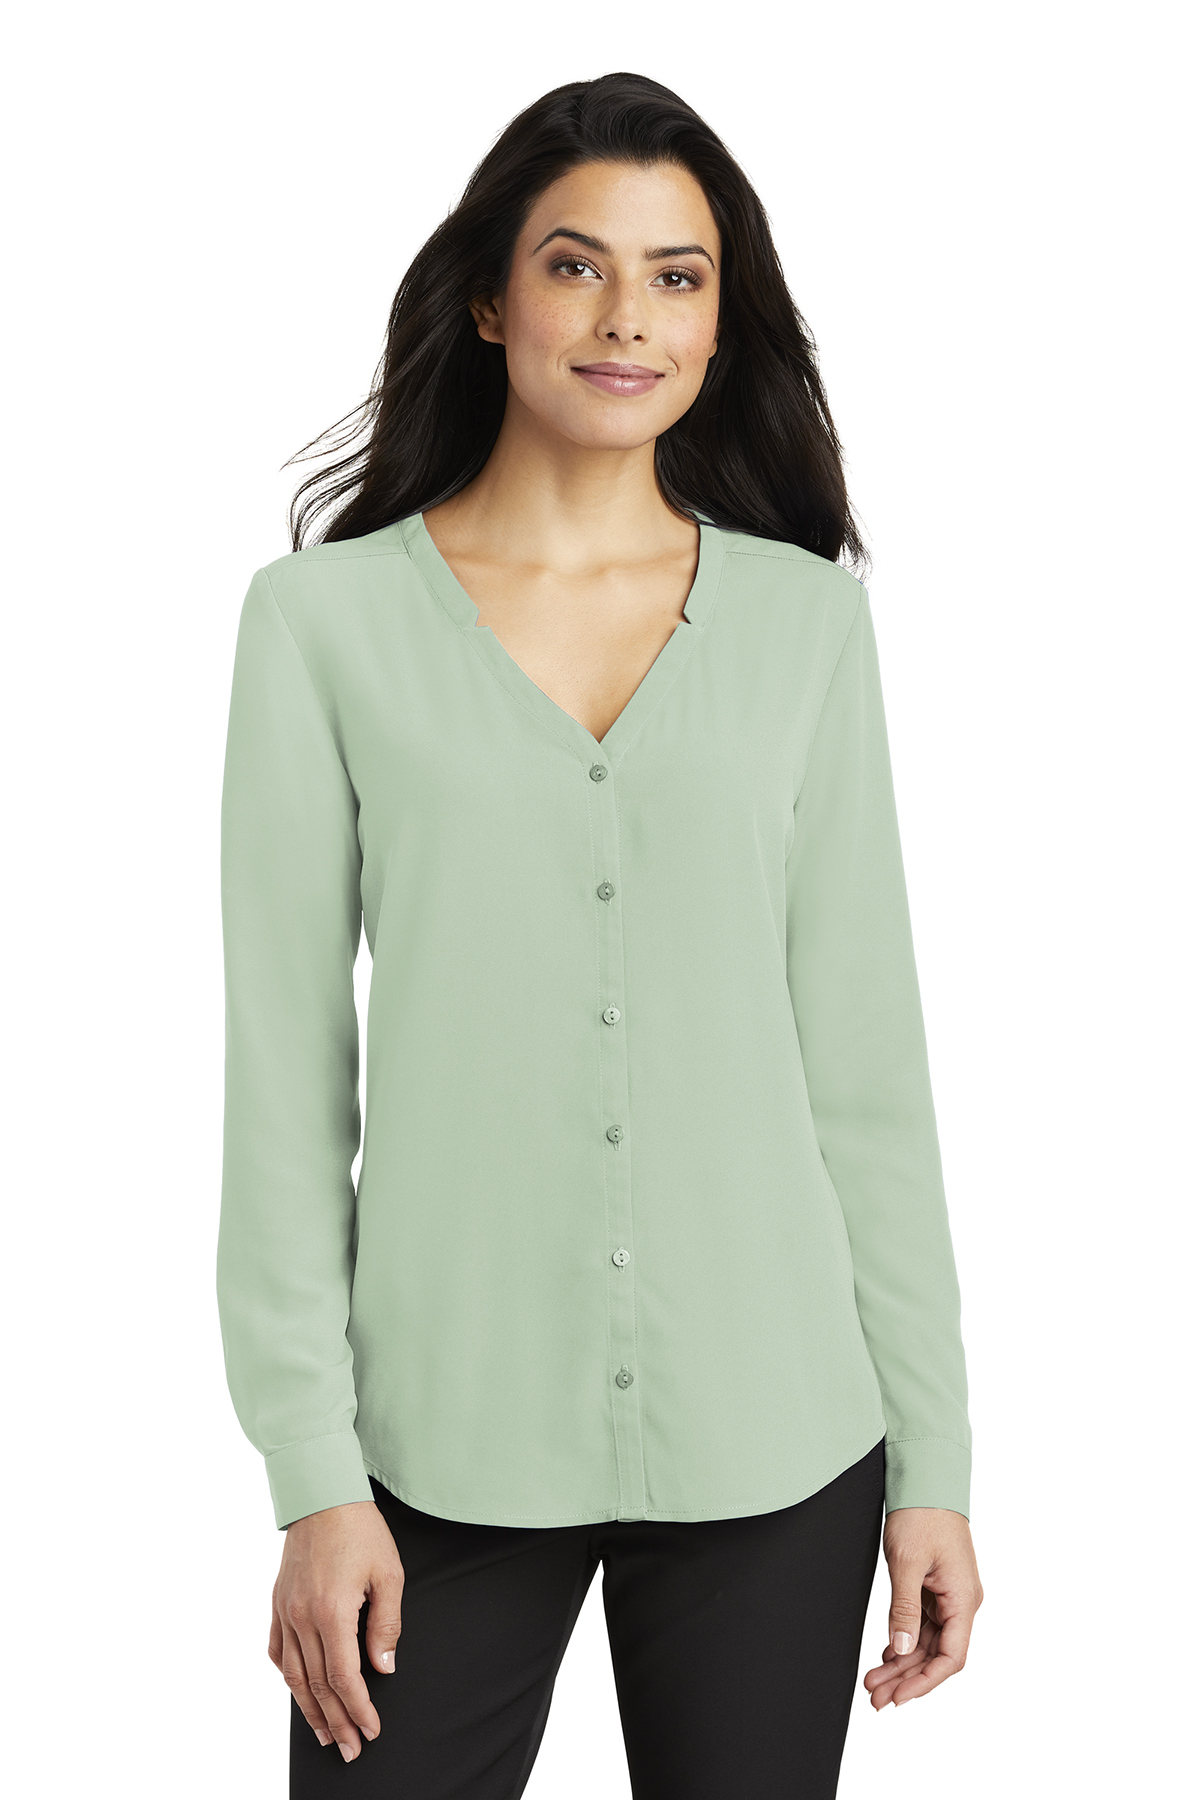 Port Authority LW700 - Ladies Long Sleeve Button-Front Blouse